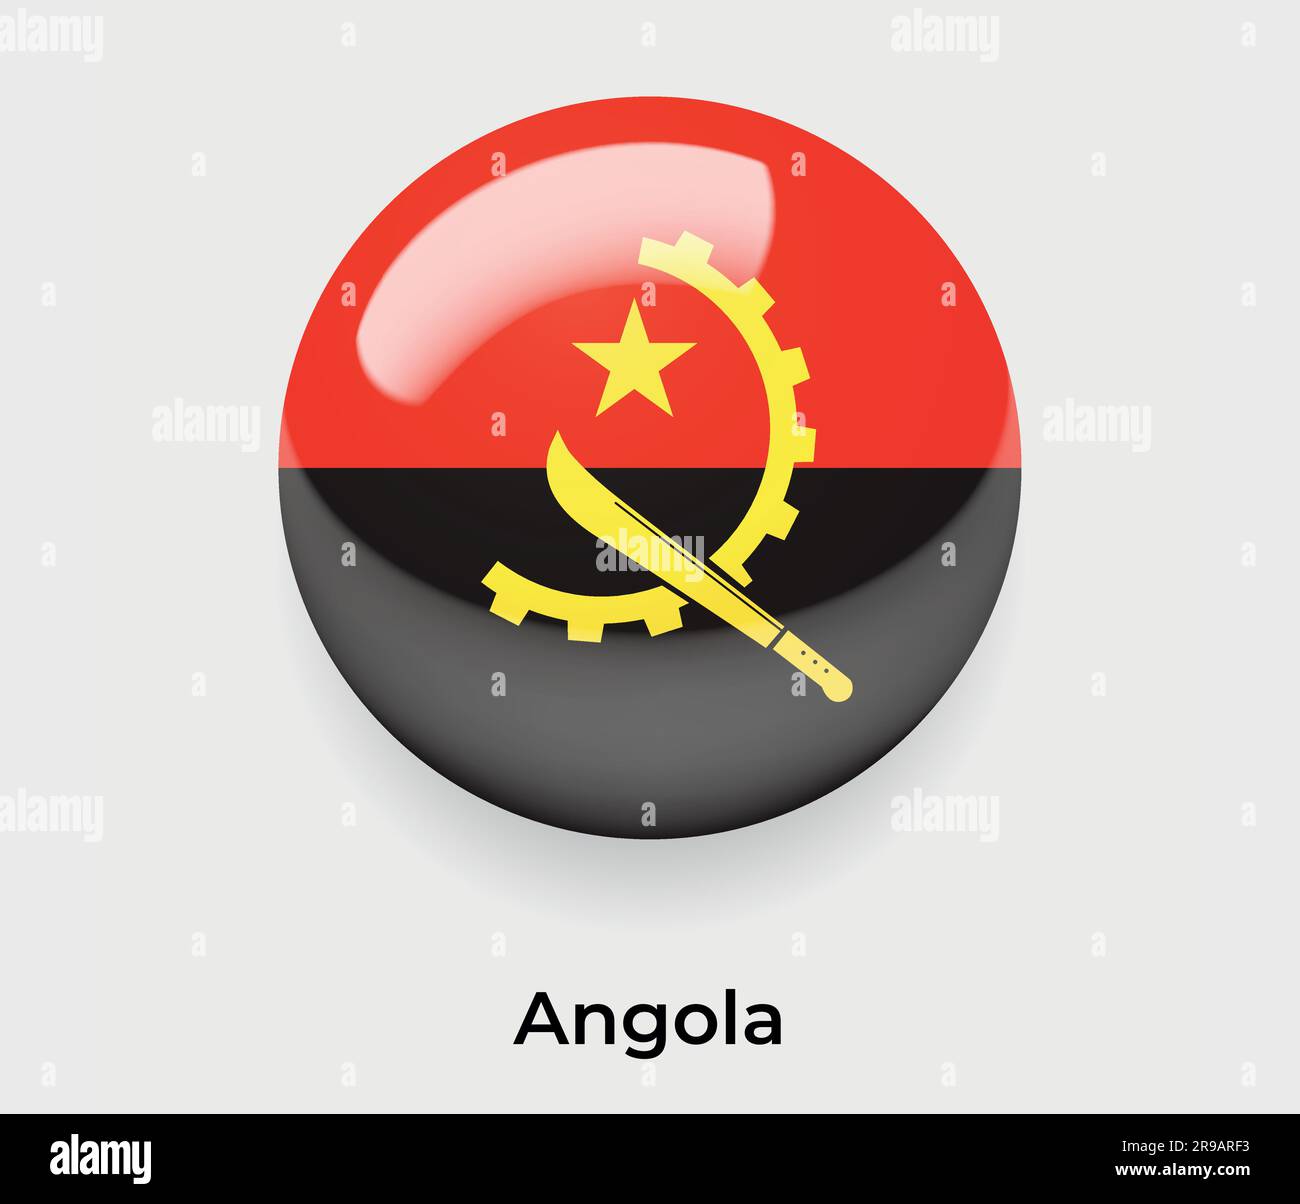 Angola glossy flag bubble circle round shape icon vector illustration glass Stock Vector